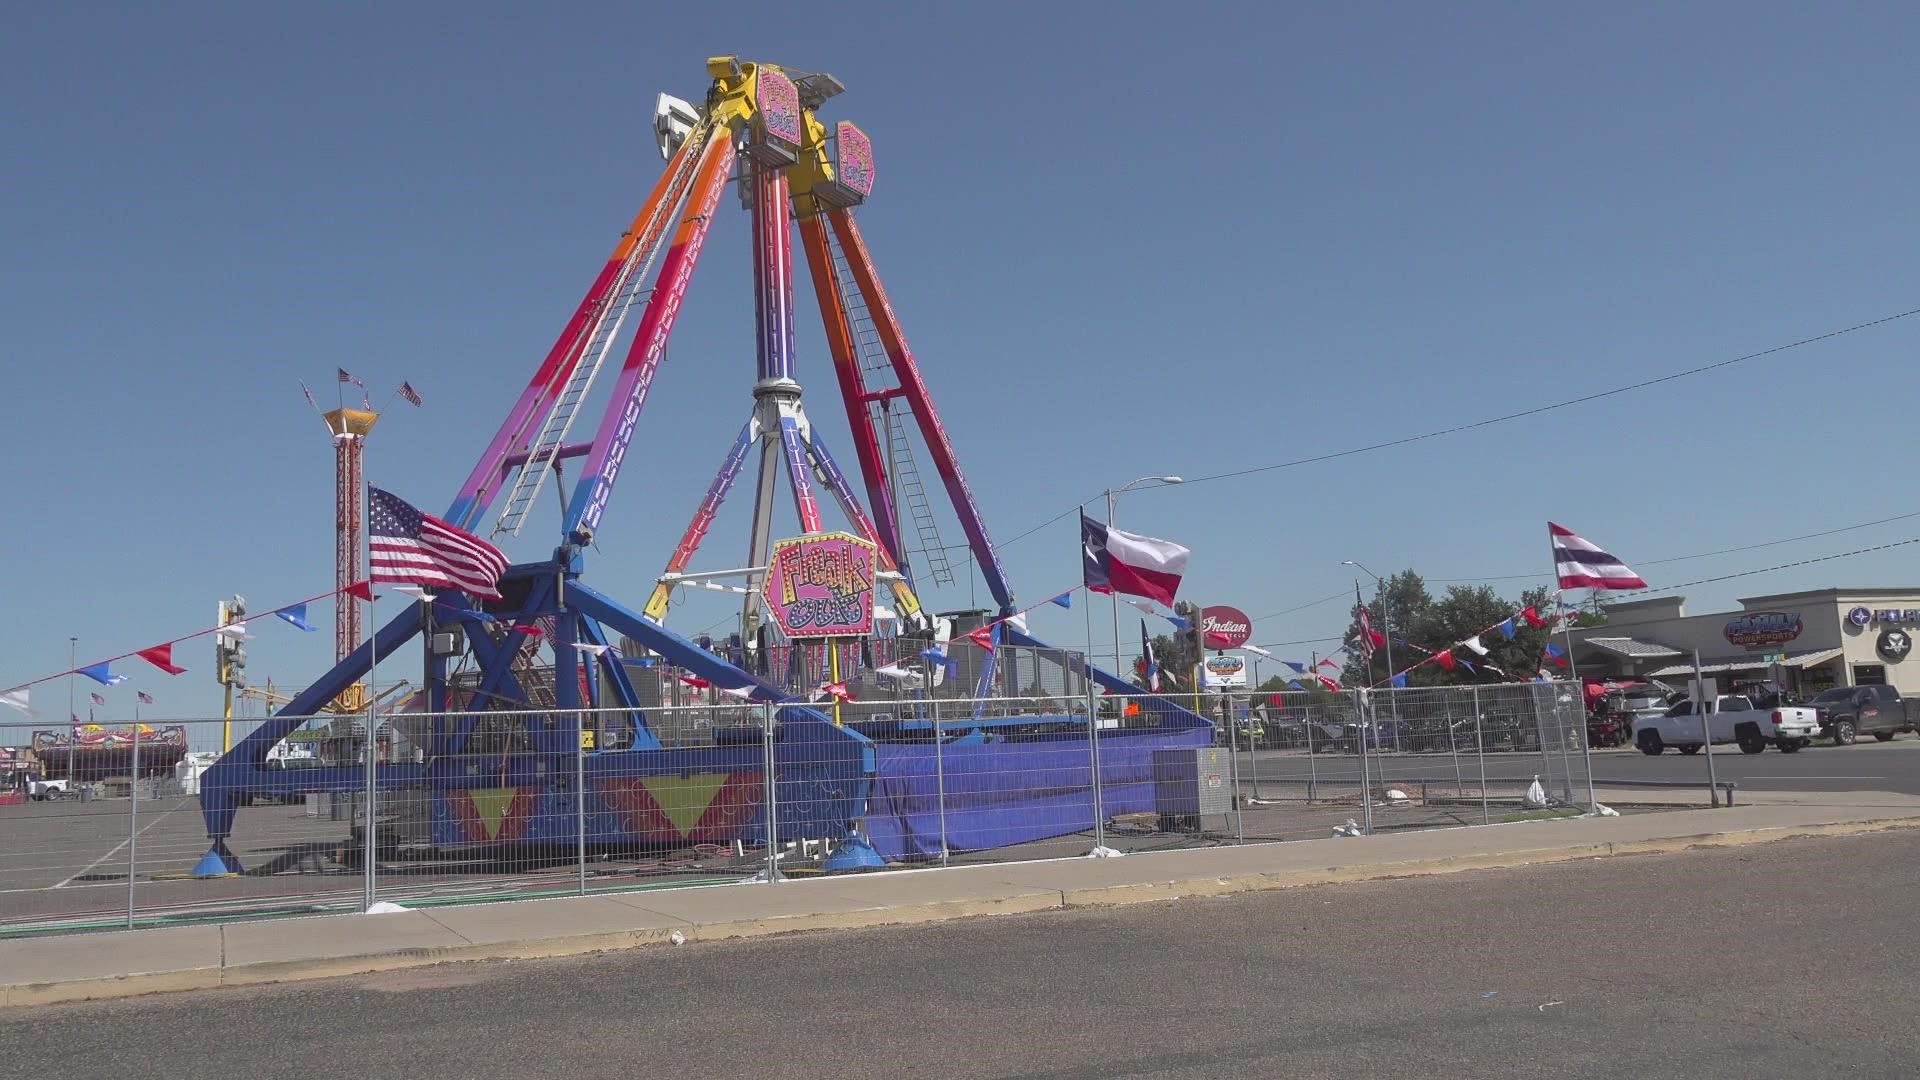 Guests with sensory needs will be allowed free entry into fair from 4 to 7 p.m.